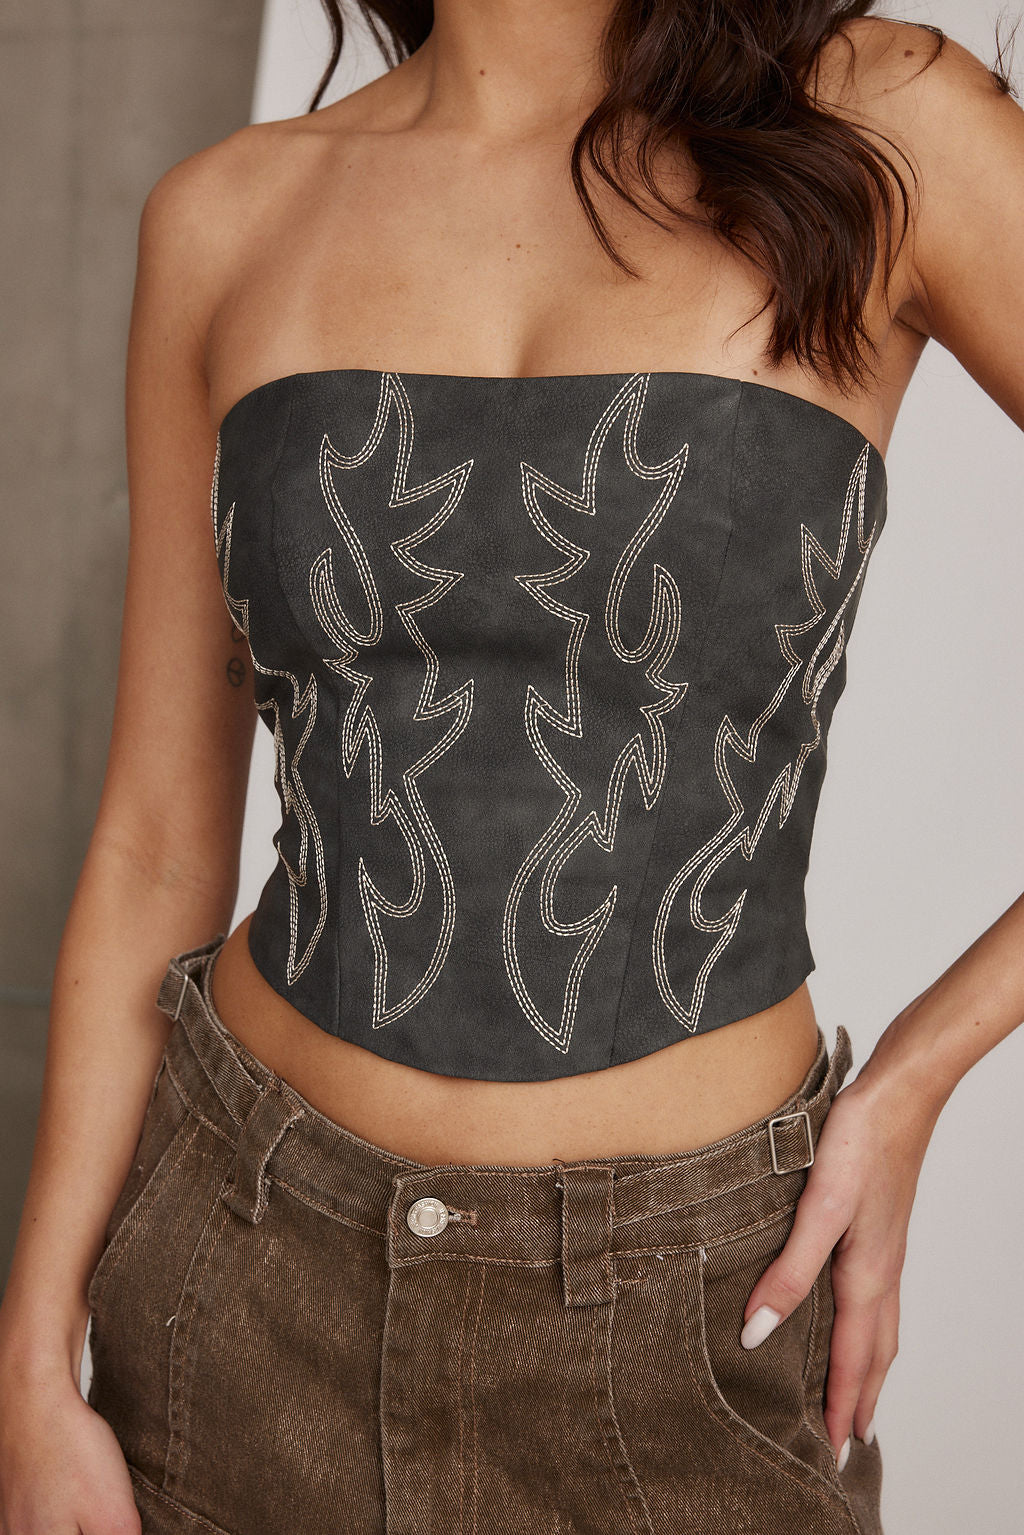 Firecracker Black Faux Leather Crop Top - band of the free